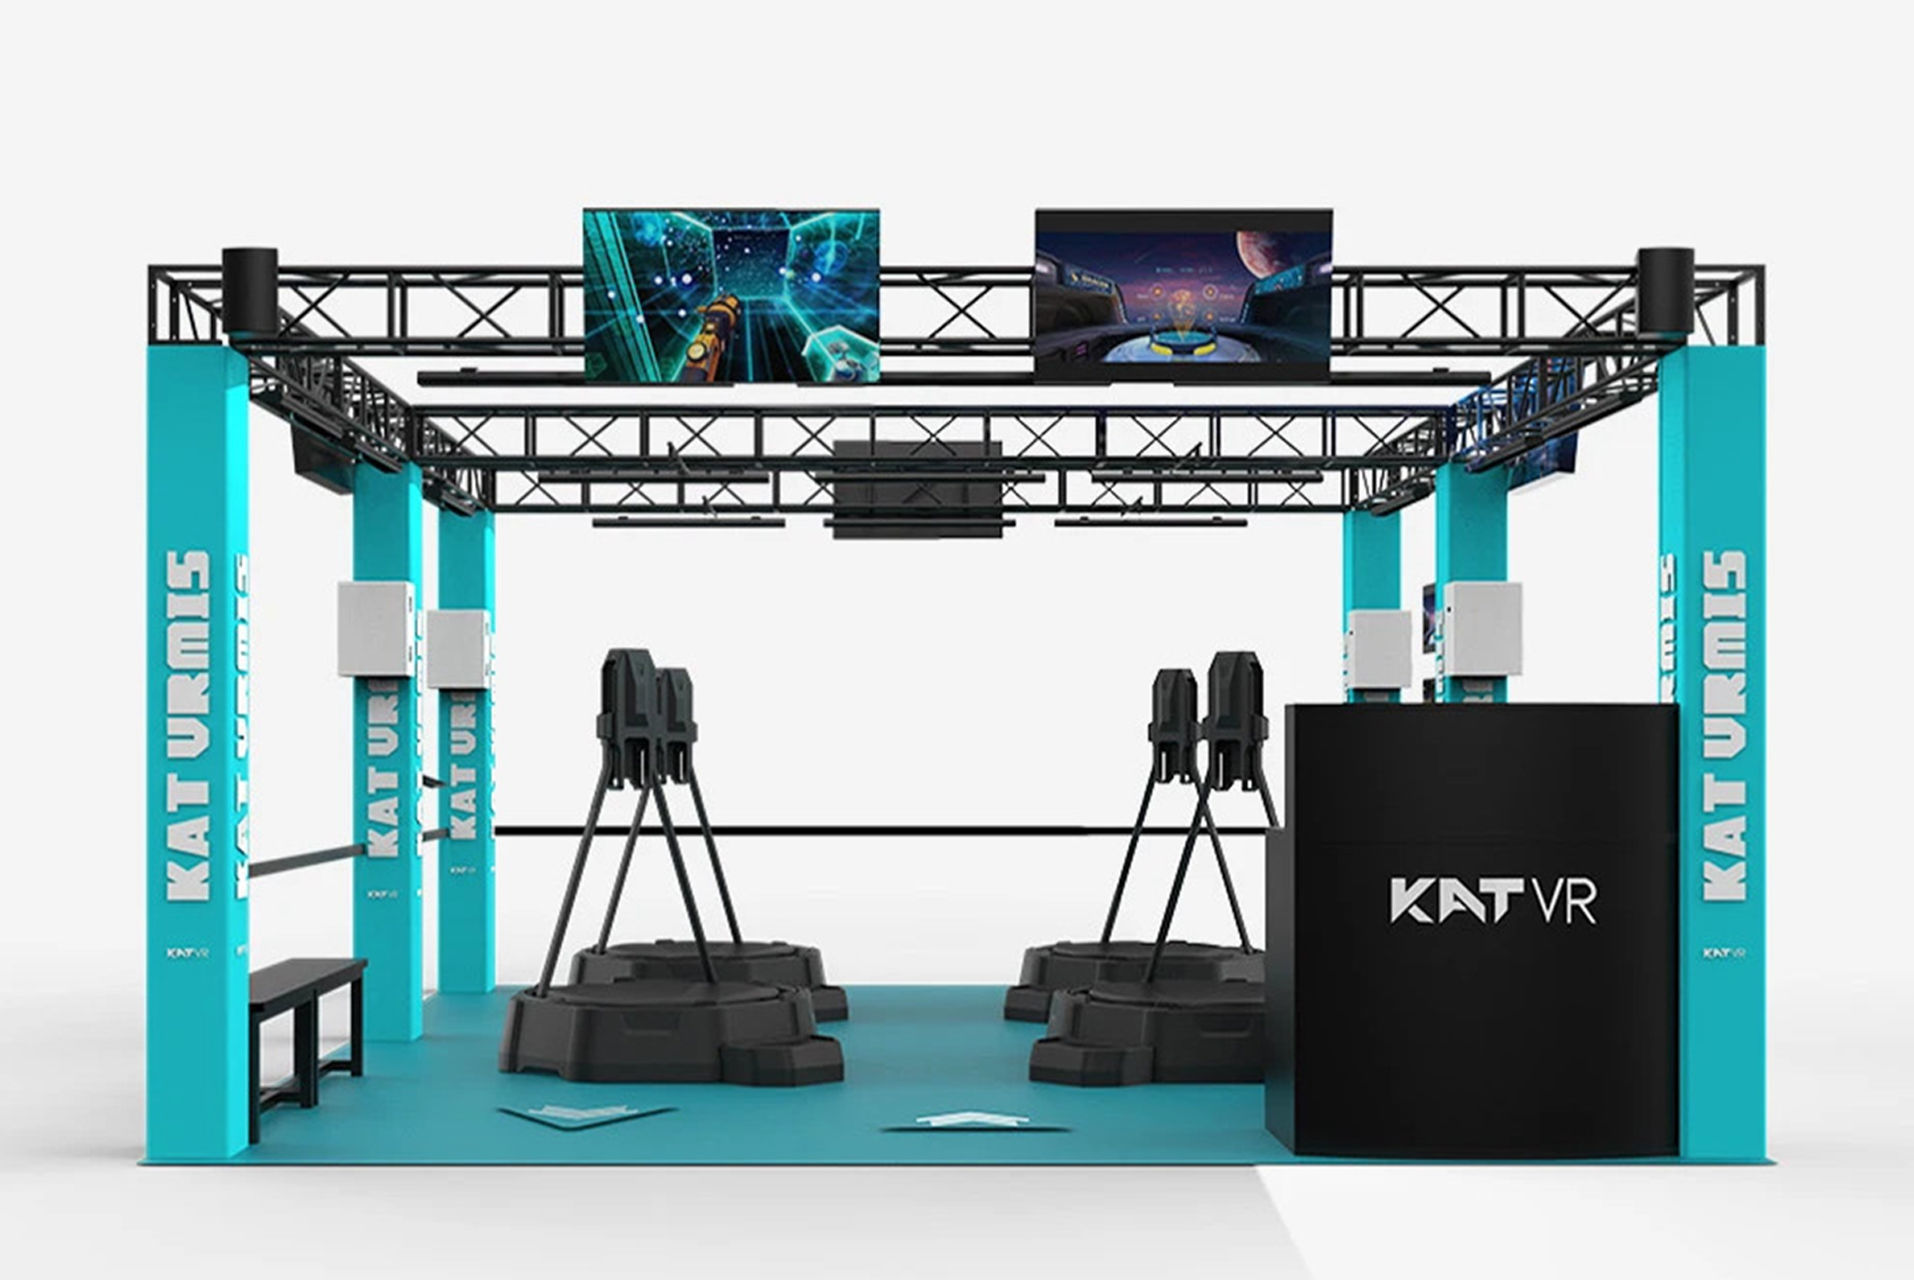 ULTIMATE SOLUTION FOR VR GAMINGKAT VRMIS Utilizes the Full Capabilities of our Non-Restrictive VR Omni-Directional Treadmills Allowing to Perform Unlimited Actions at Limited Physical Space.